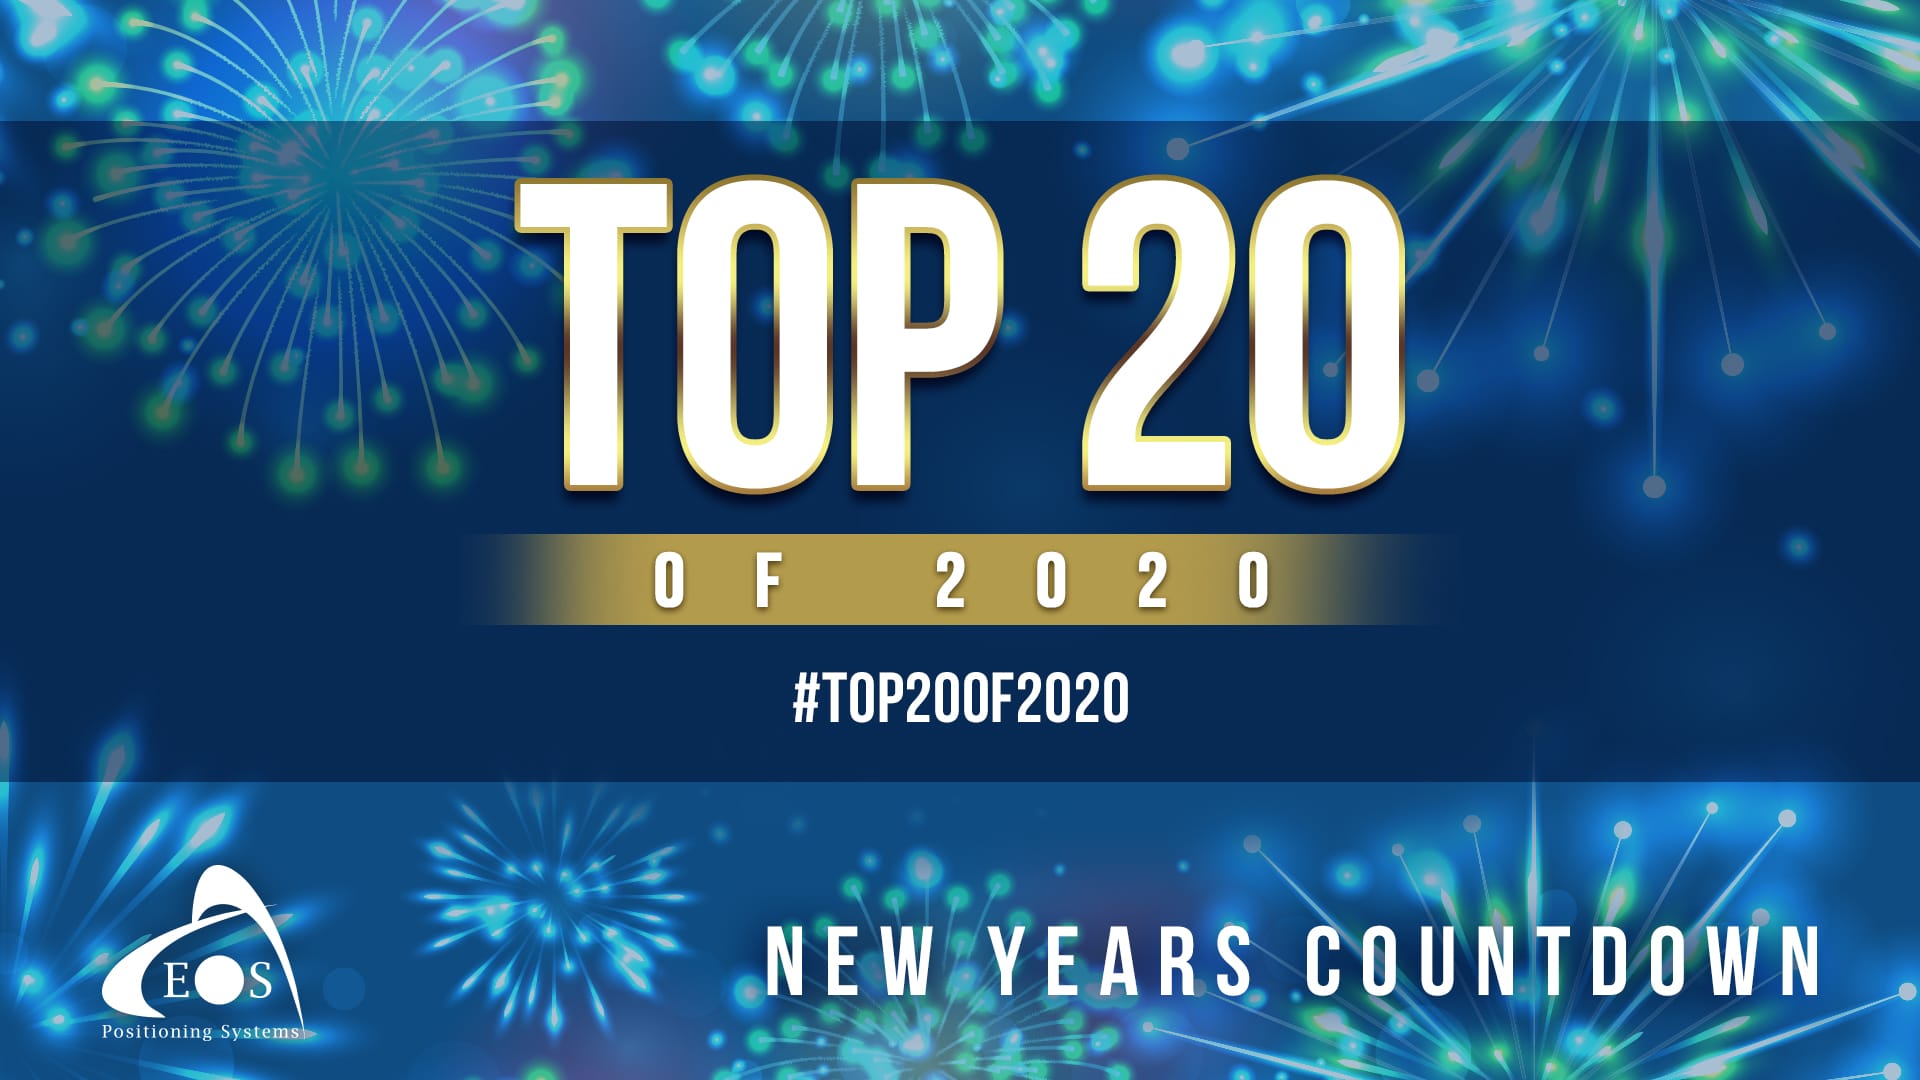 Feature image - Eos Positioning Systems Top 20 Posts of 2020 Countdown